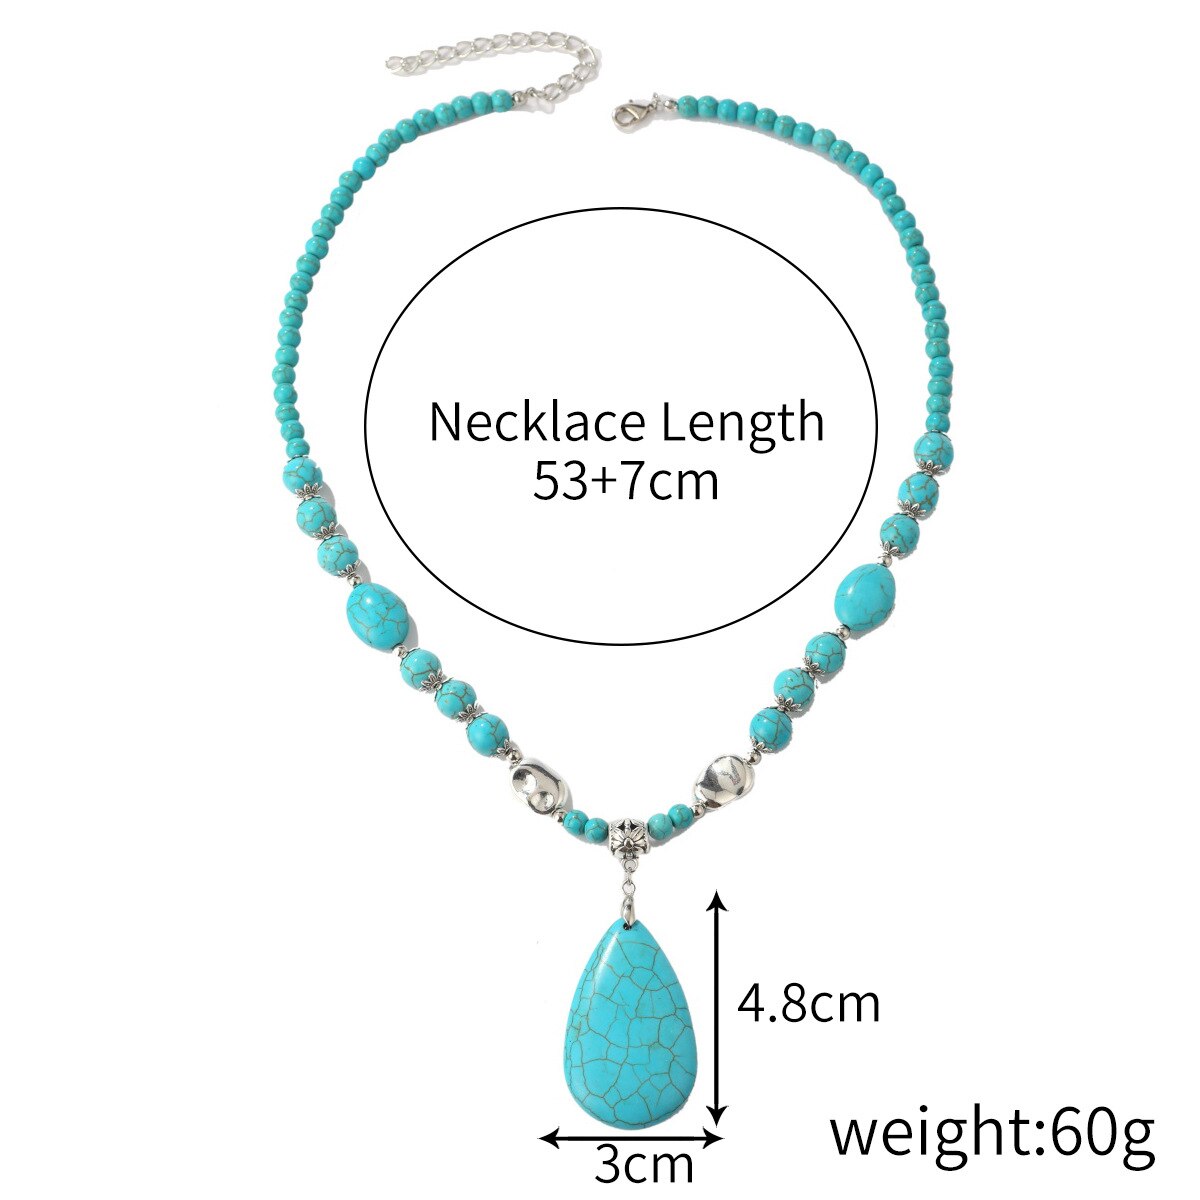 Ethnic Style Long Natural Turquoise Pendant Necklace Occidental Bohemian Necklace Holiday Fashion Party Jewelry Gift Accessories